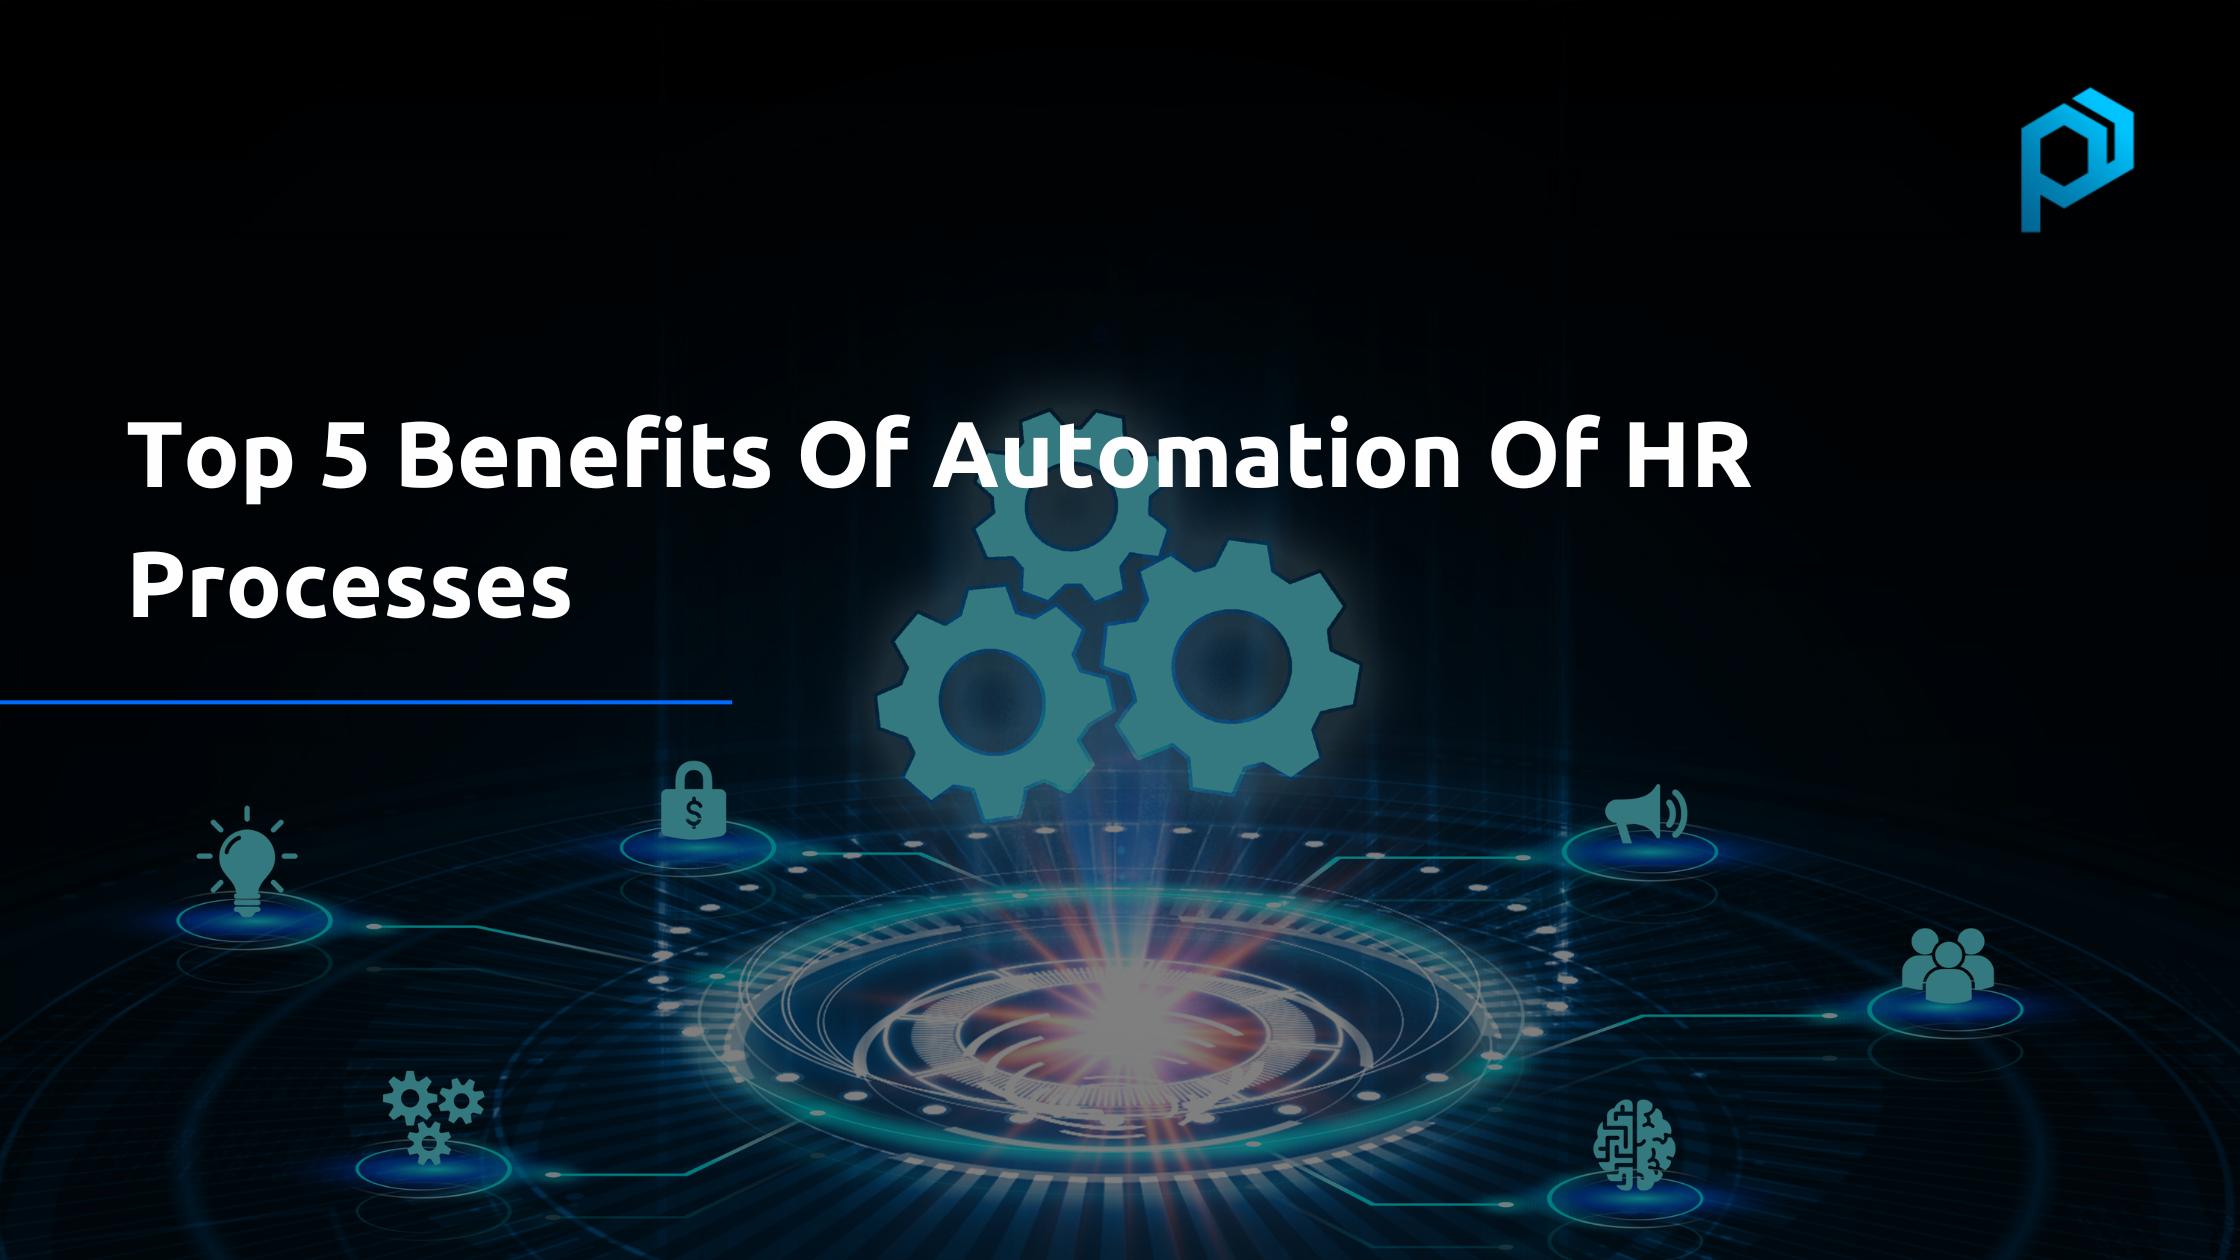 Automation of HR Processes